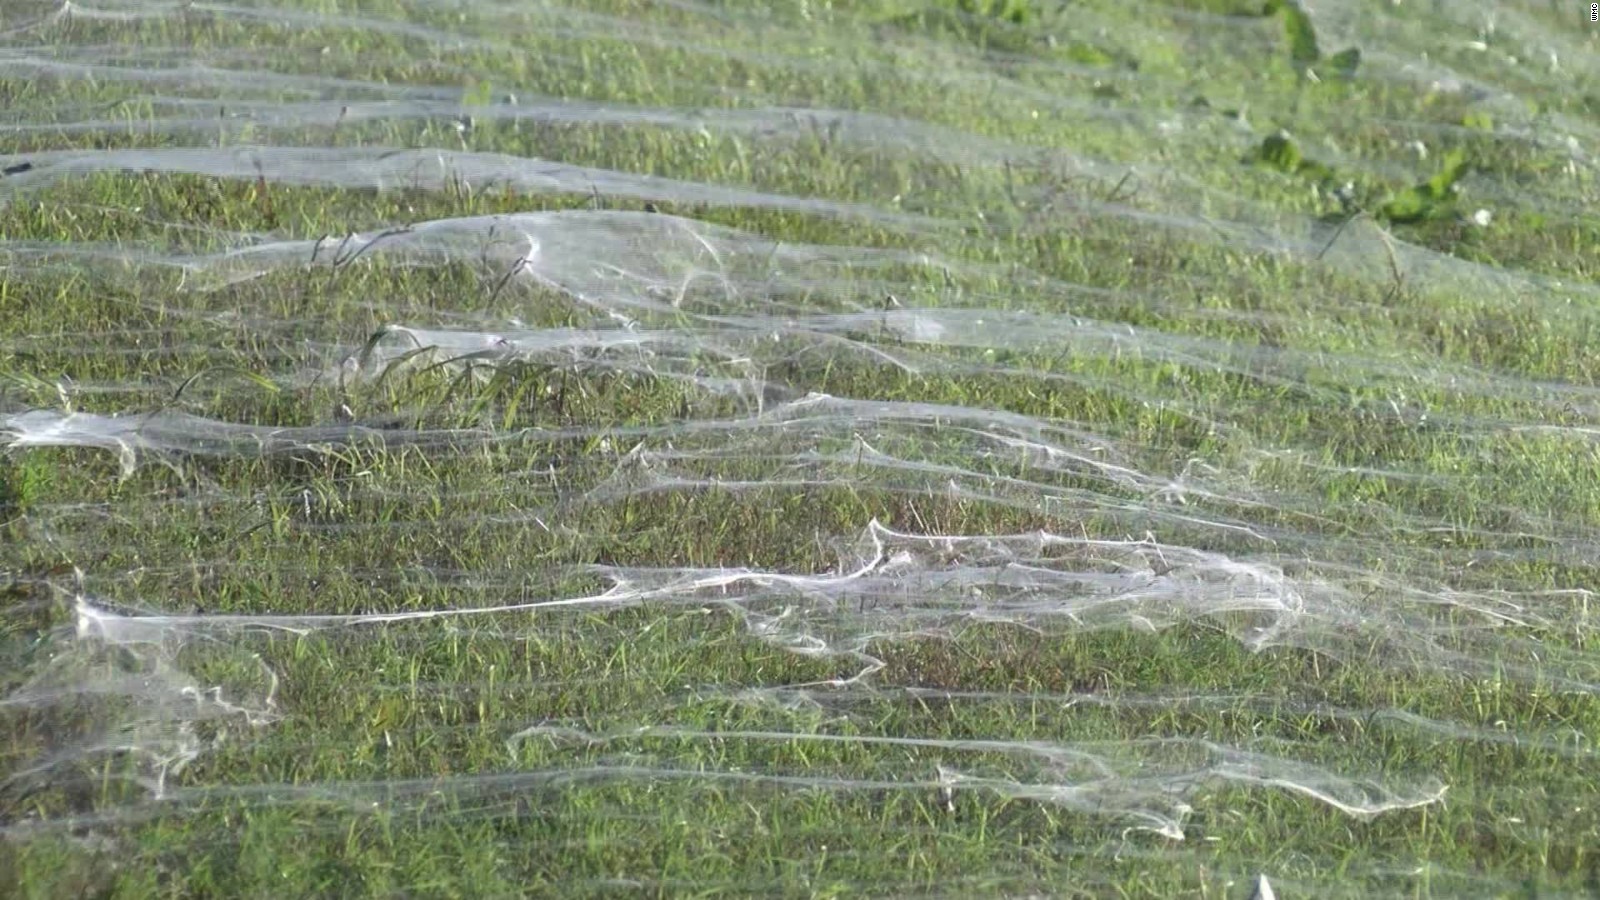 alt="Millions of Spiders Take over Town in Tenn."